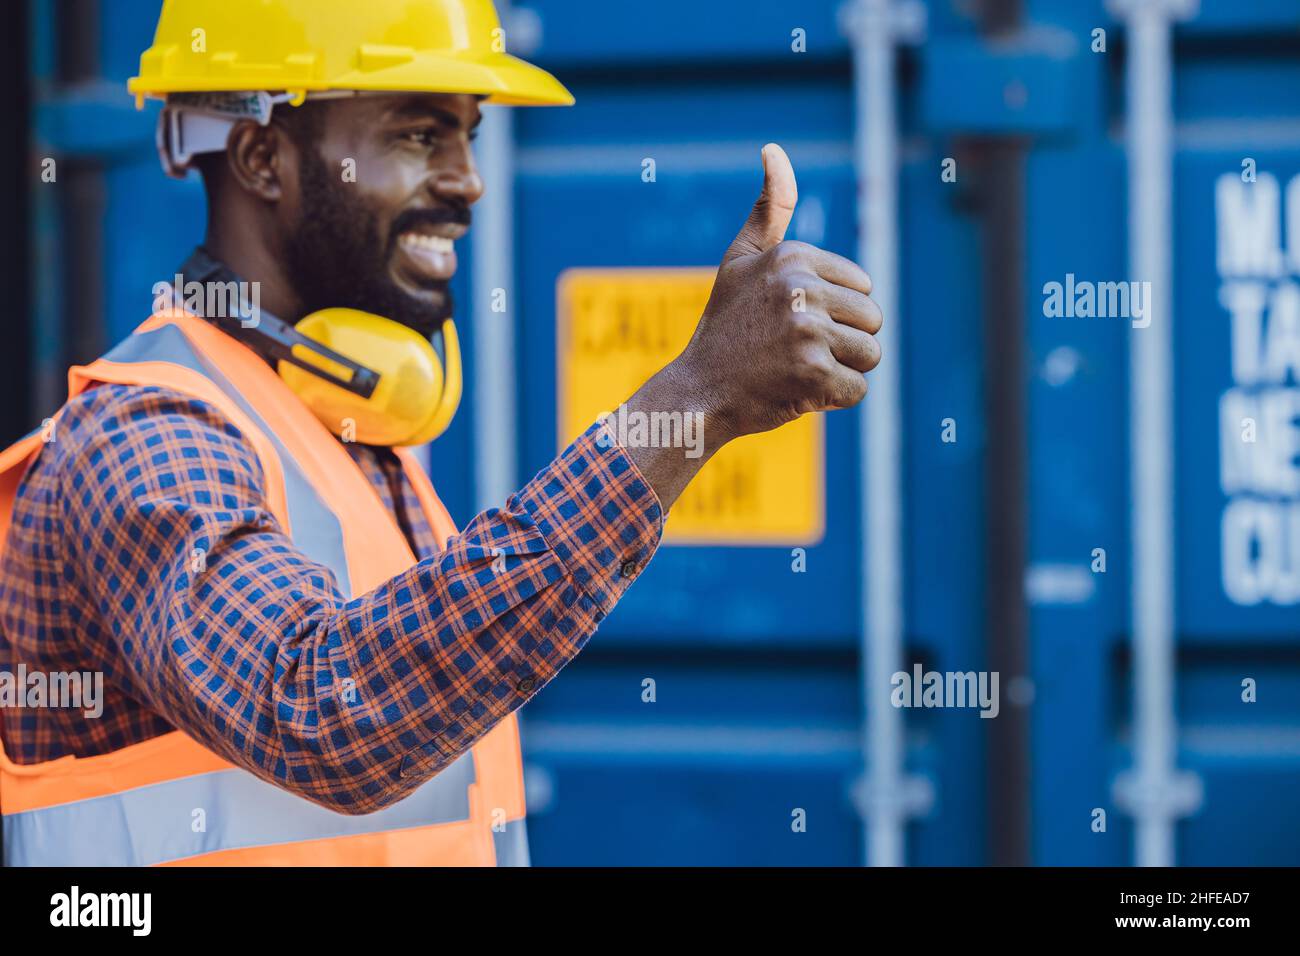 worker thumbs up hand sign good job best working approved, selective focus at hand Stock Photo